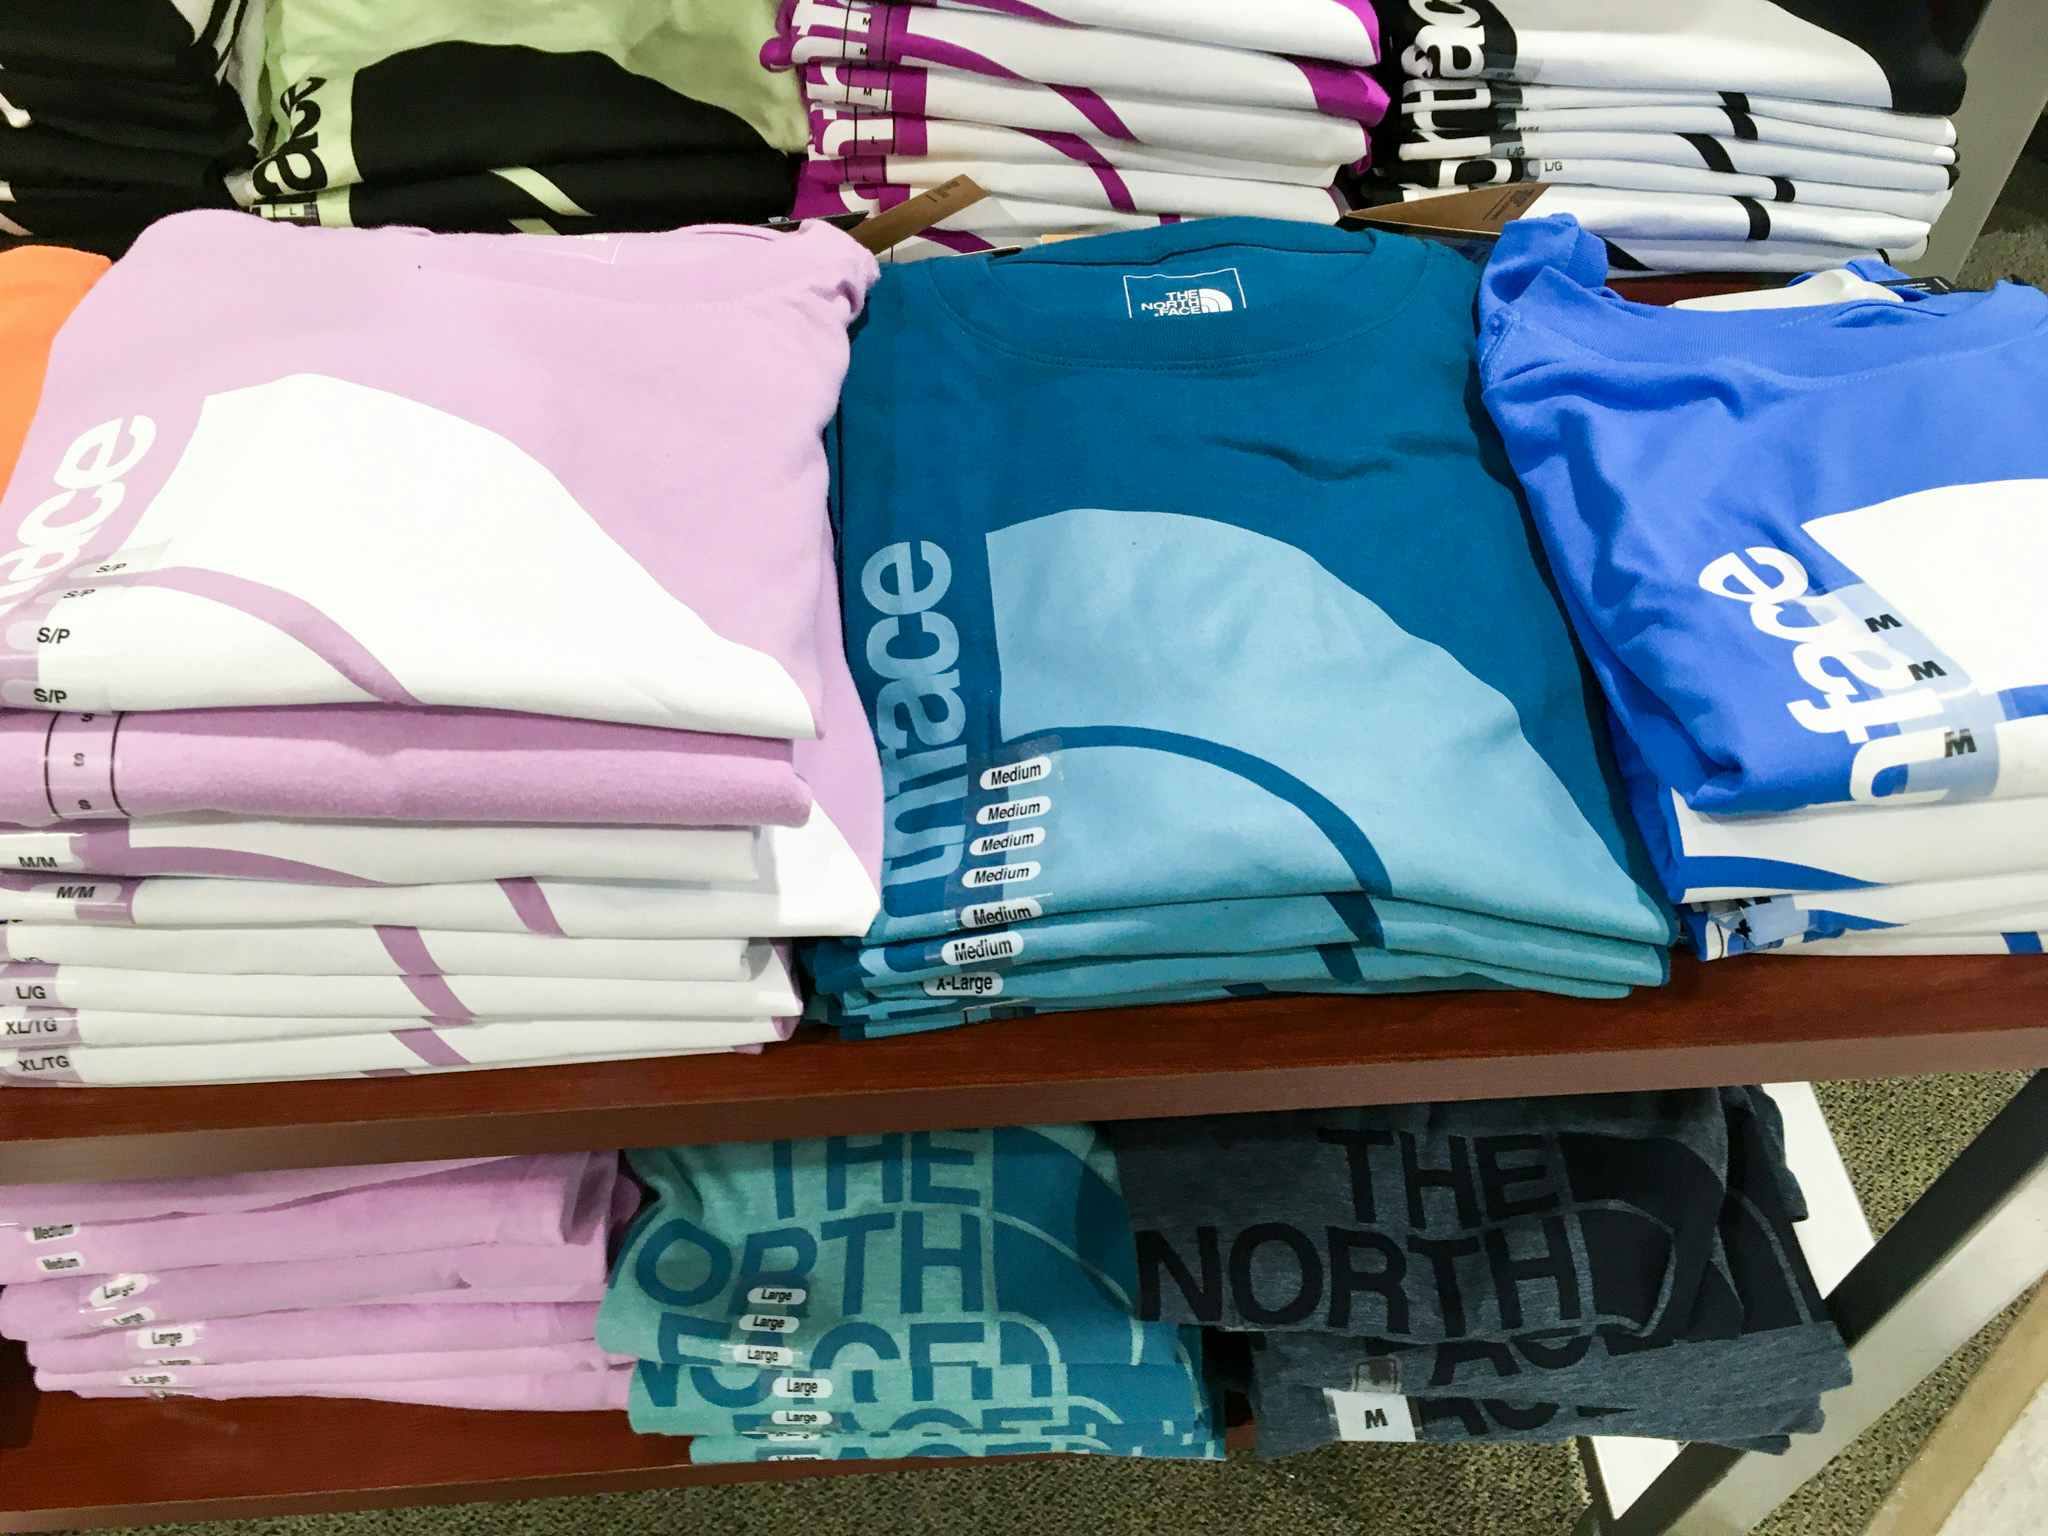 The North Face Shirts at Backcountry: $12 for Kids and $16 for Adults